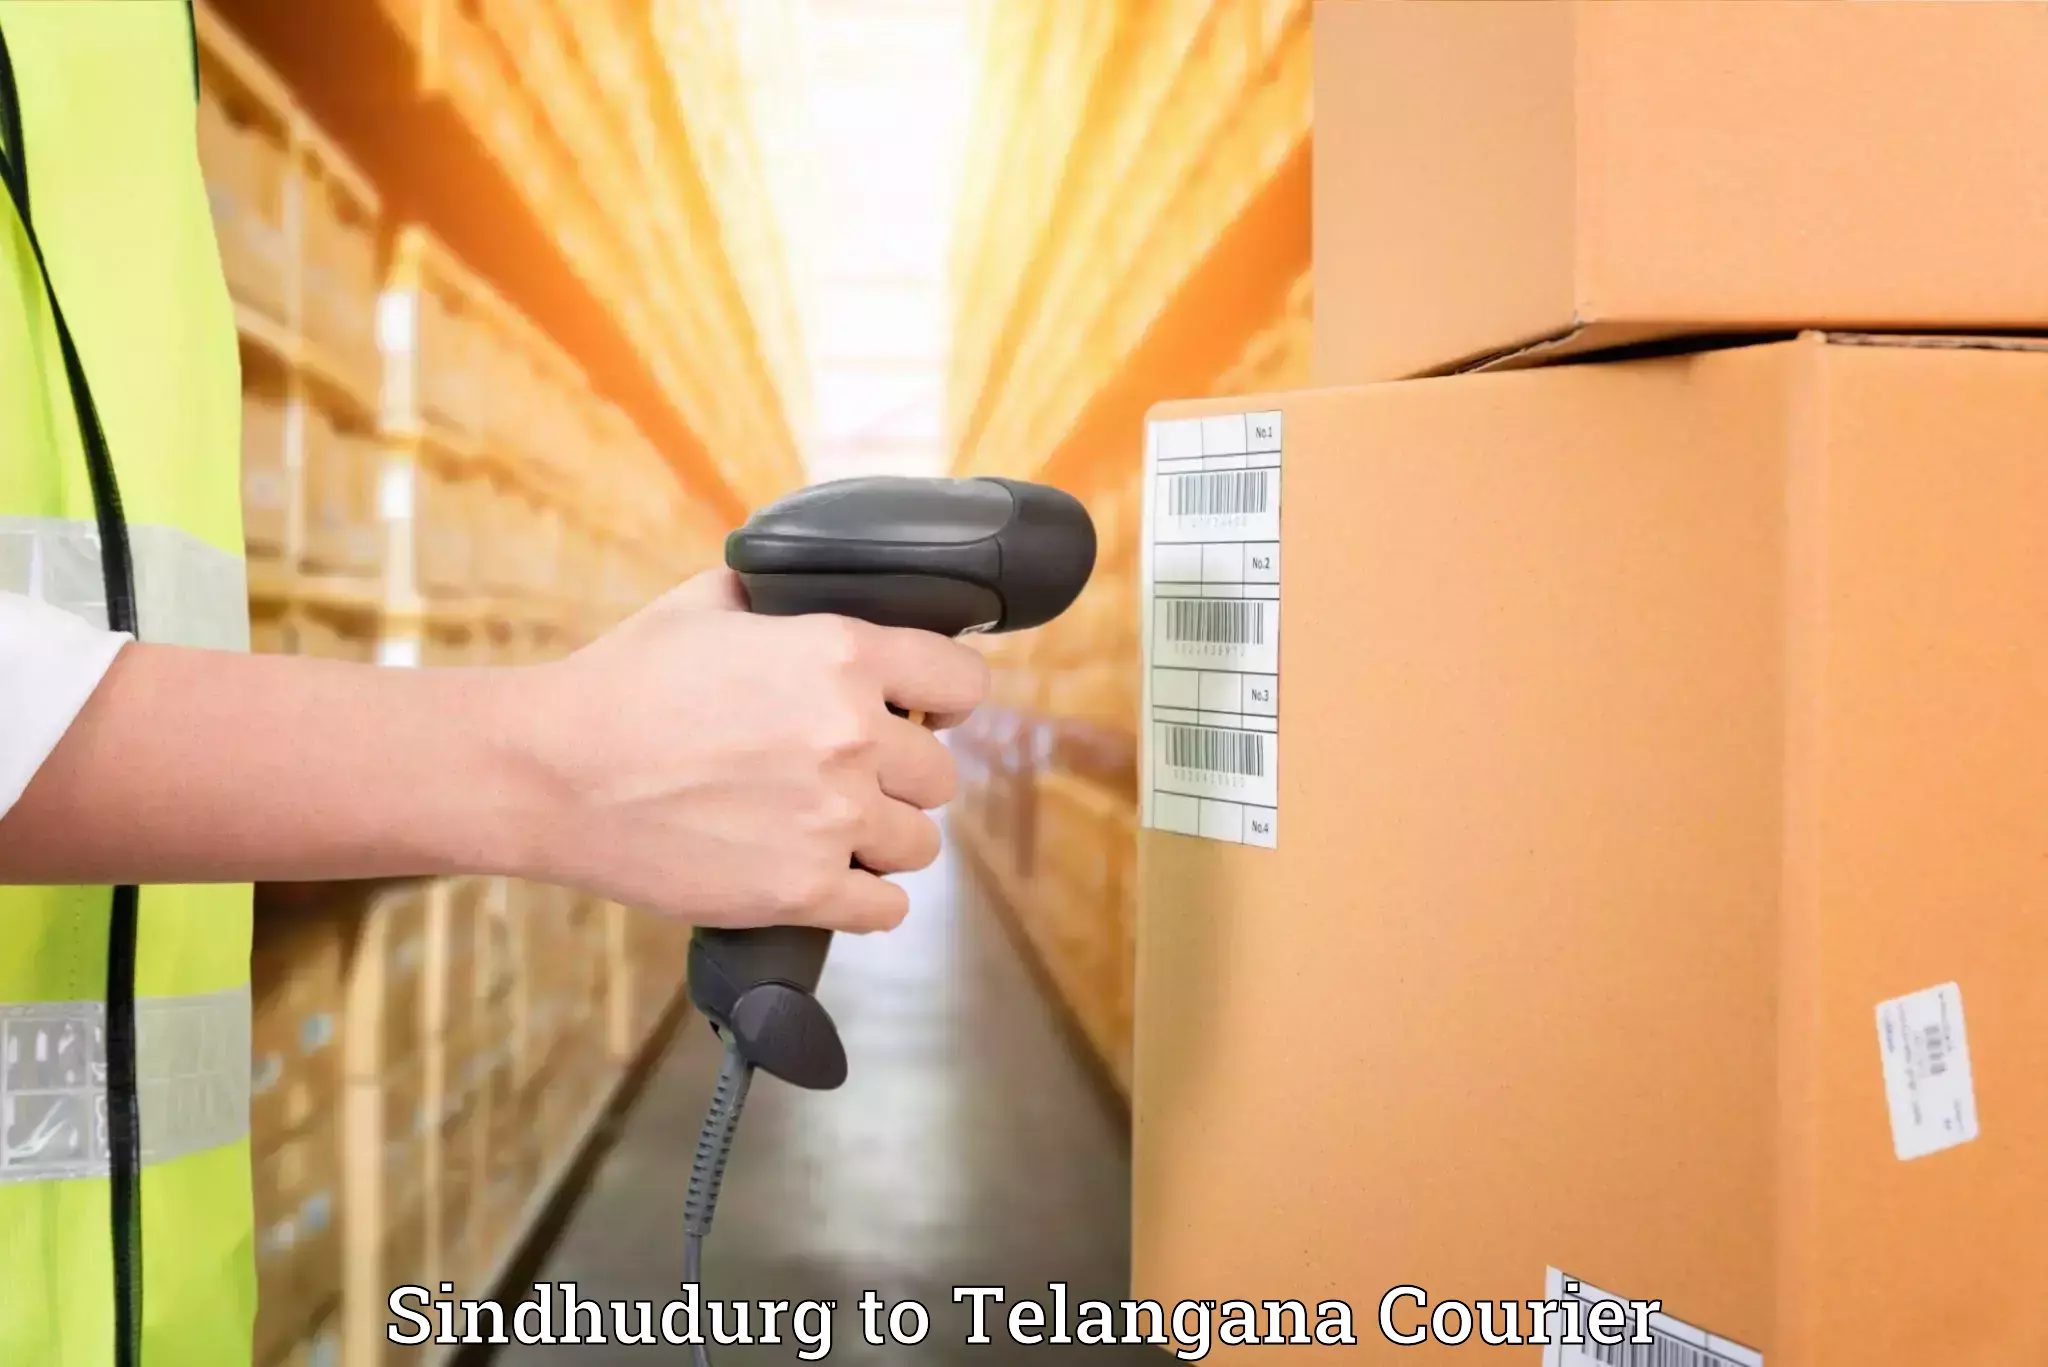 Professional furniture movers Sindhudurg to Hyderabad